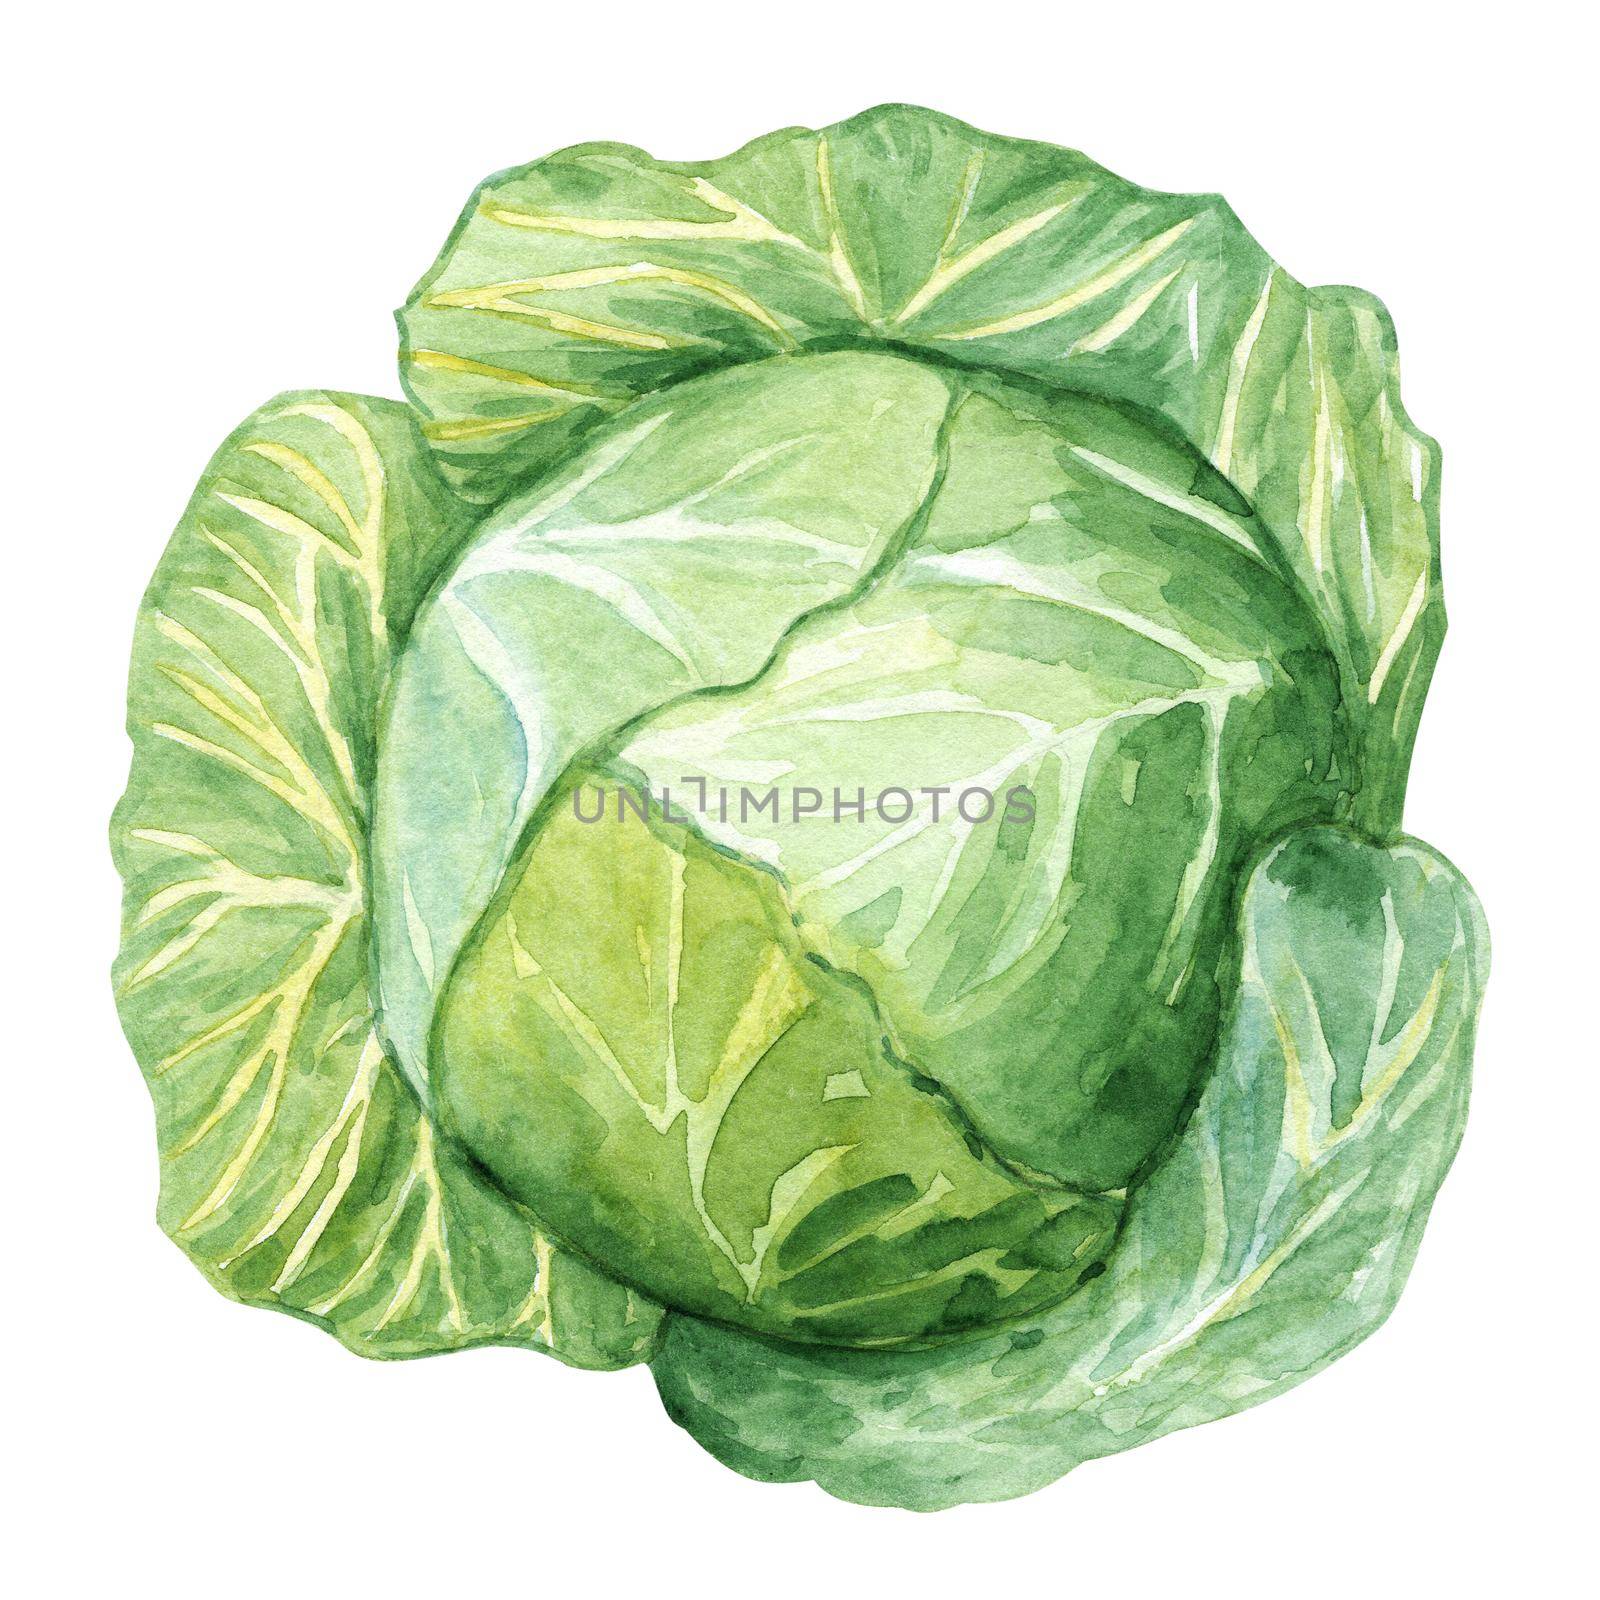 Watercolor green cabbage isolated on white background. Vegetable hand drawn illustration